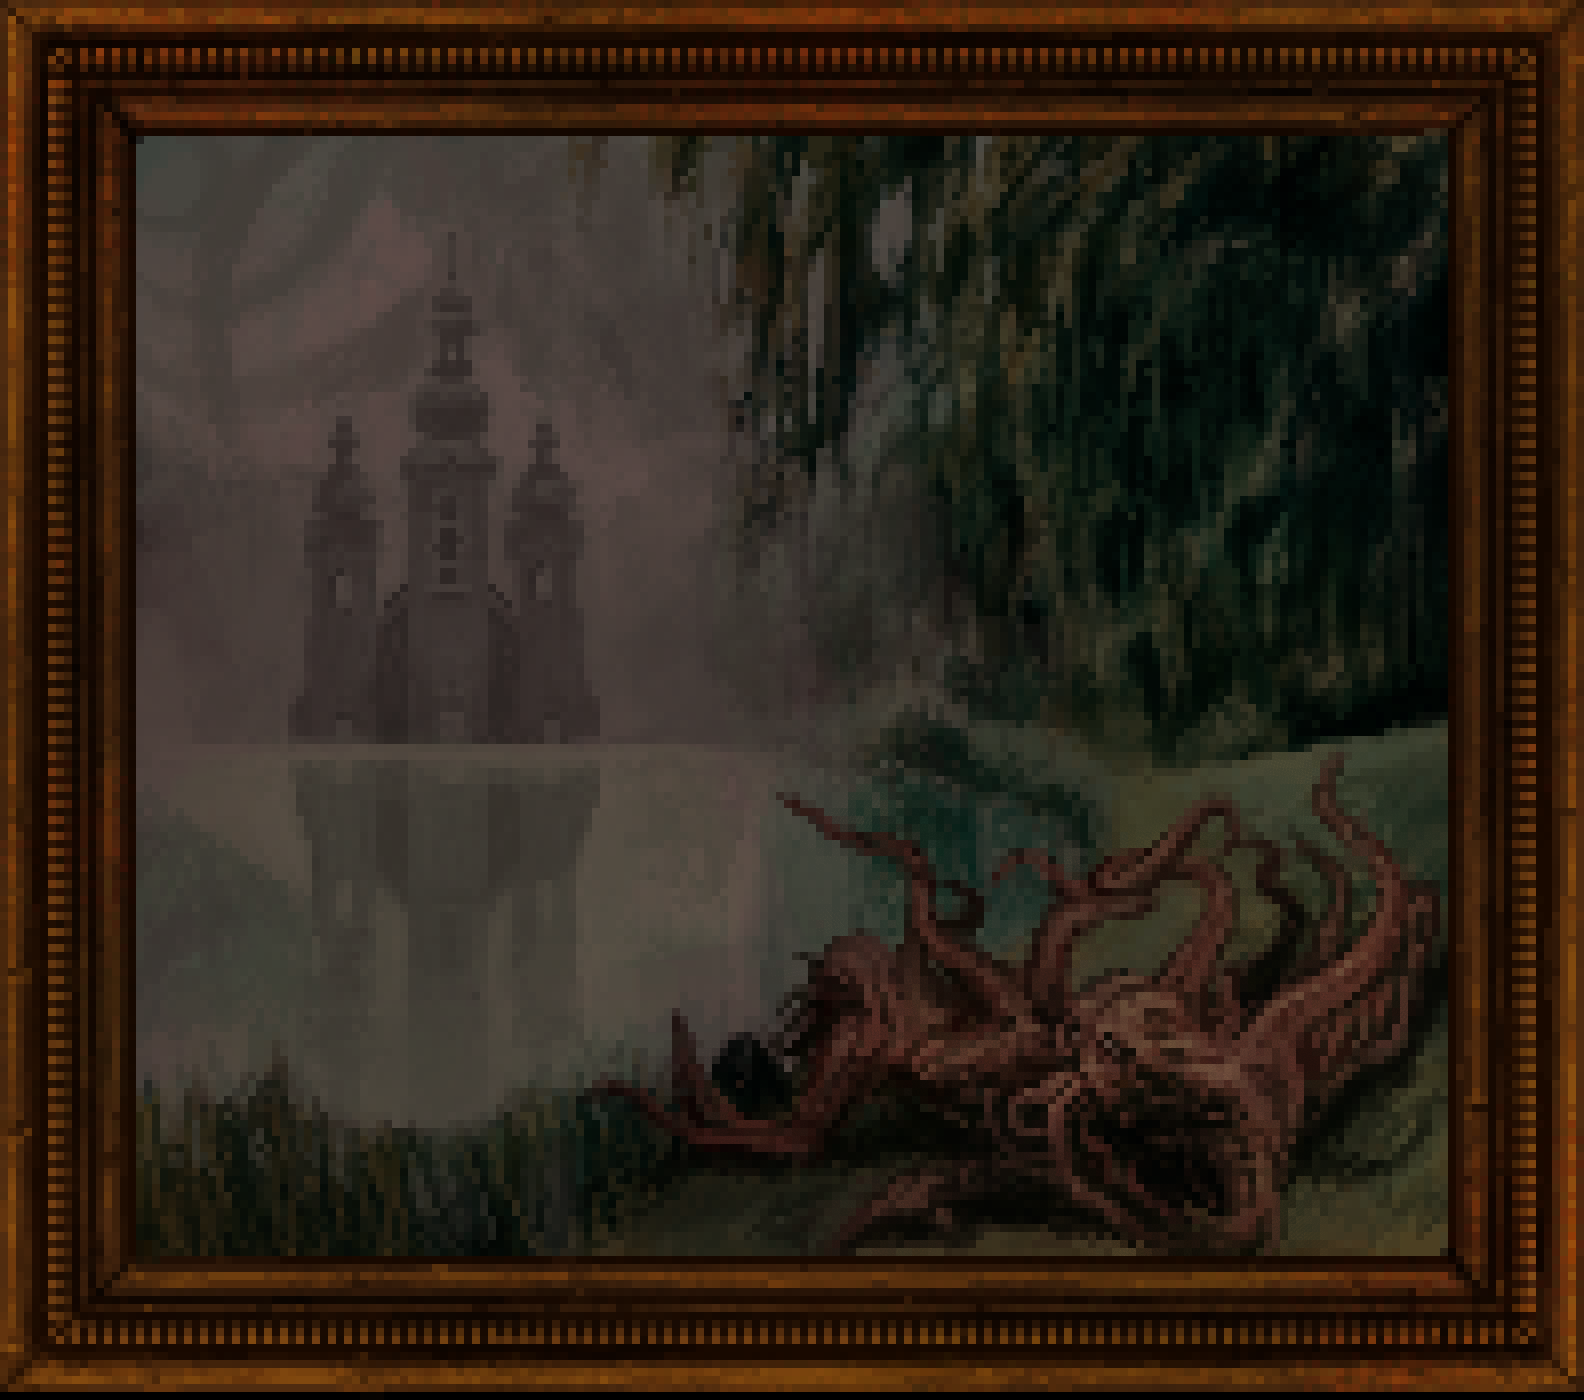 in the final stage, the pixel art painting has become tinged with red. the church has solidified across the lake, and sits menacingly reflected in the water. in the sky above it there is some huge shadow with tentacles coming off it that is difficult to see in the fog, and on the near shore, where the couple was, there are two creatures lying on the ground covered in tendrils and instead of having human faces, they have glowing eyes and huge mouths that have tentacles coming out of them